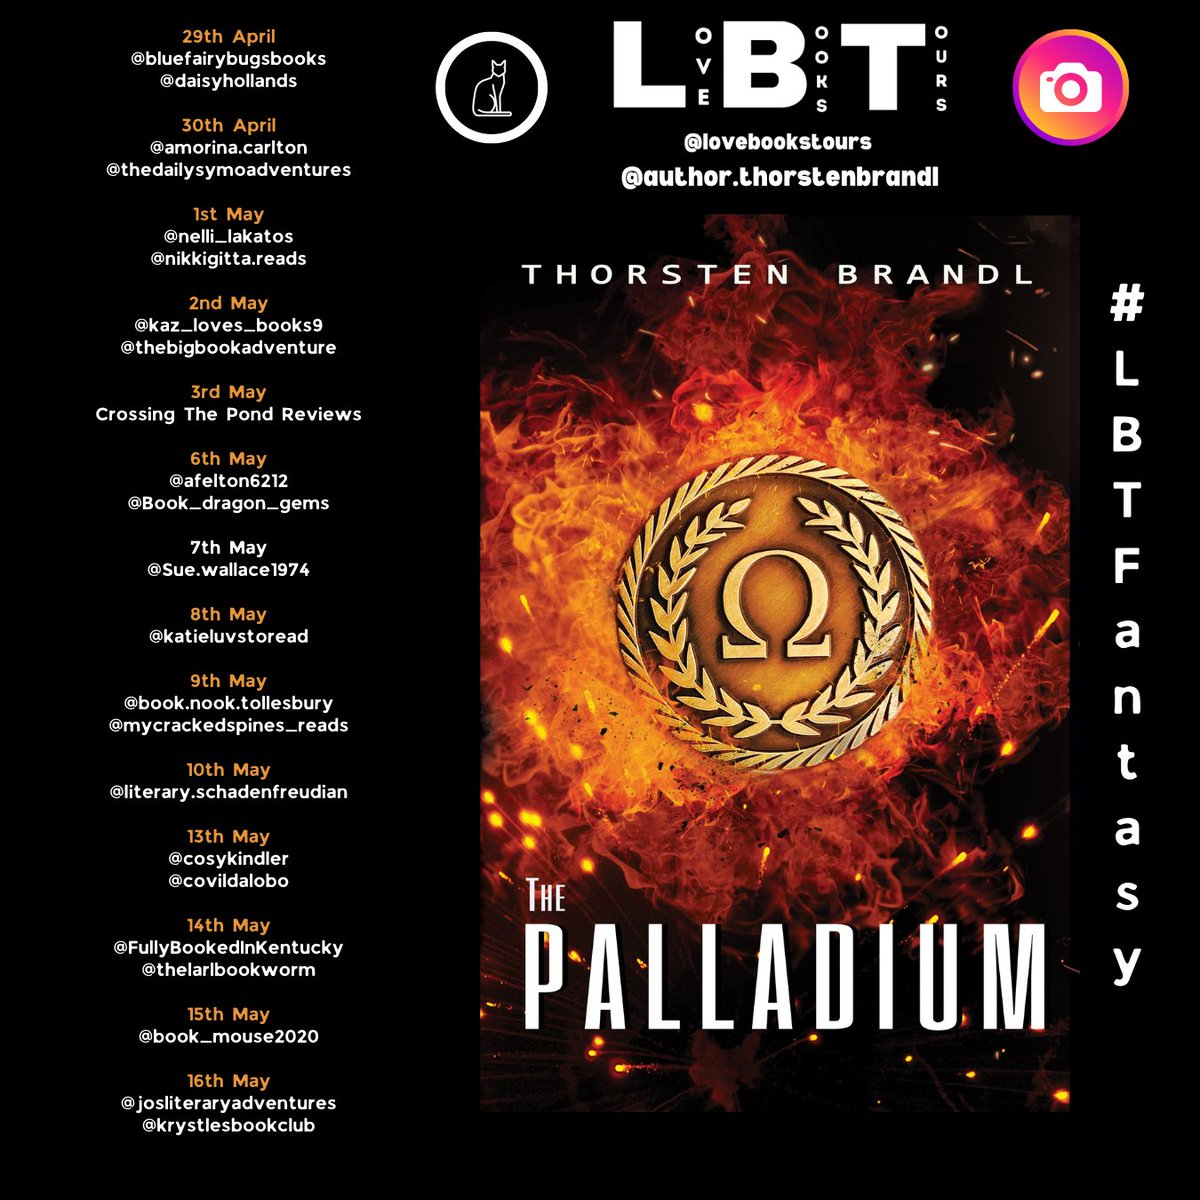 Follow the #Virtualbooktour for The Palladium by Thorsten Brandl | Proudly organised by @lovebookstours #BookTour #LBTCrew #Bookreviews kellylacey.com/2024/04/30/fol… via @KellyALacey